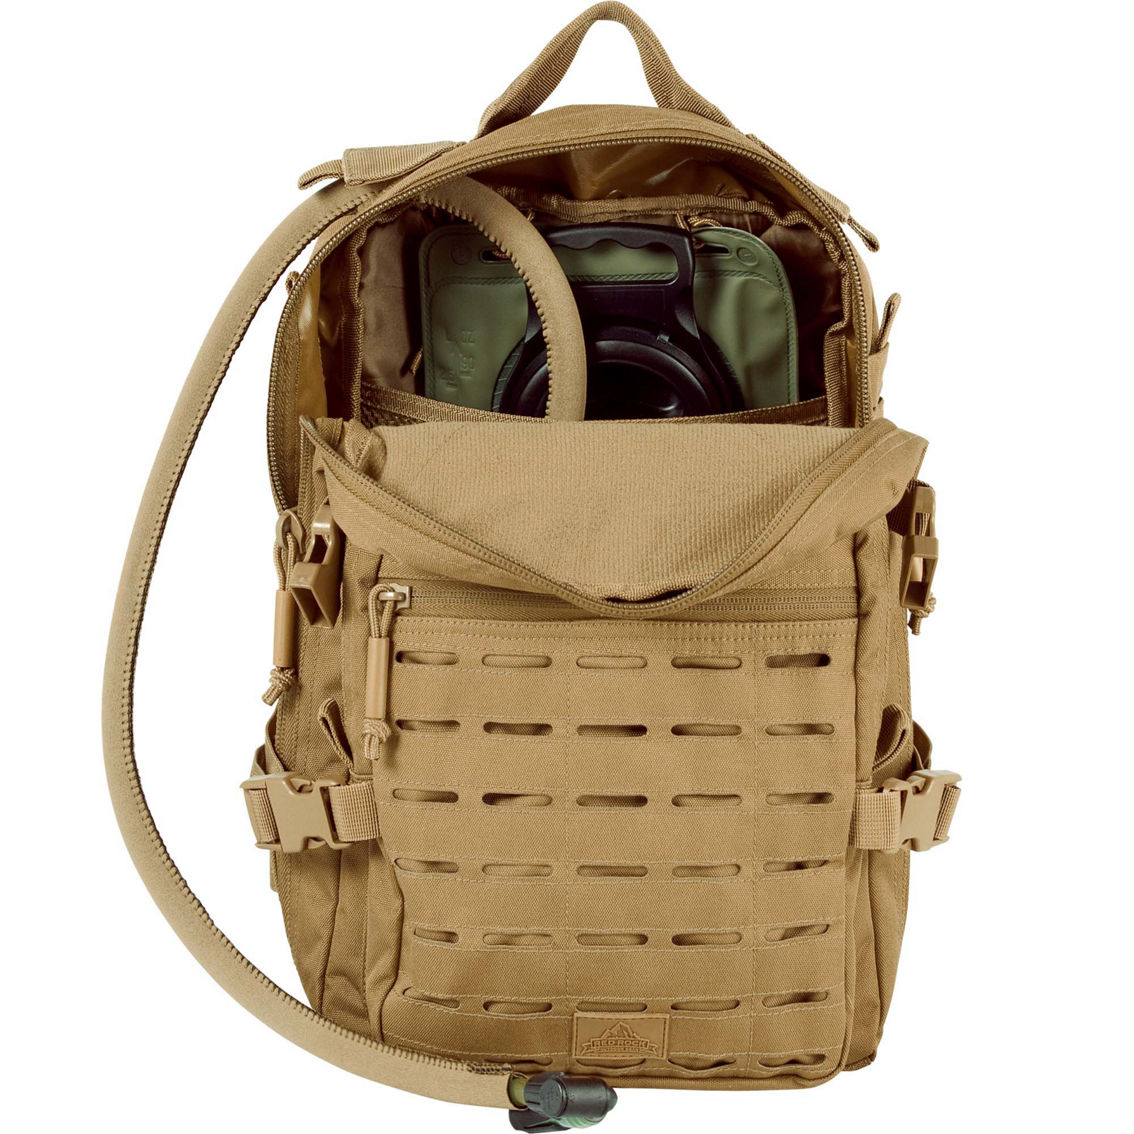 Red Rock Outdoor Gear Transporter Day Pack - Image 5 of 9